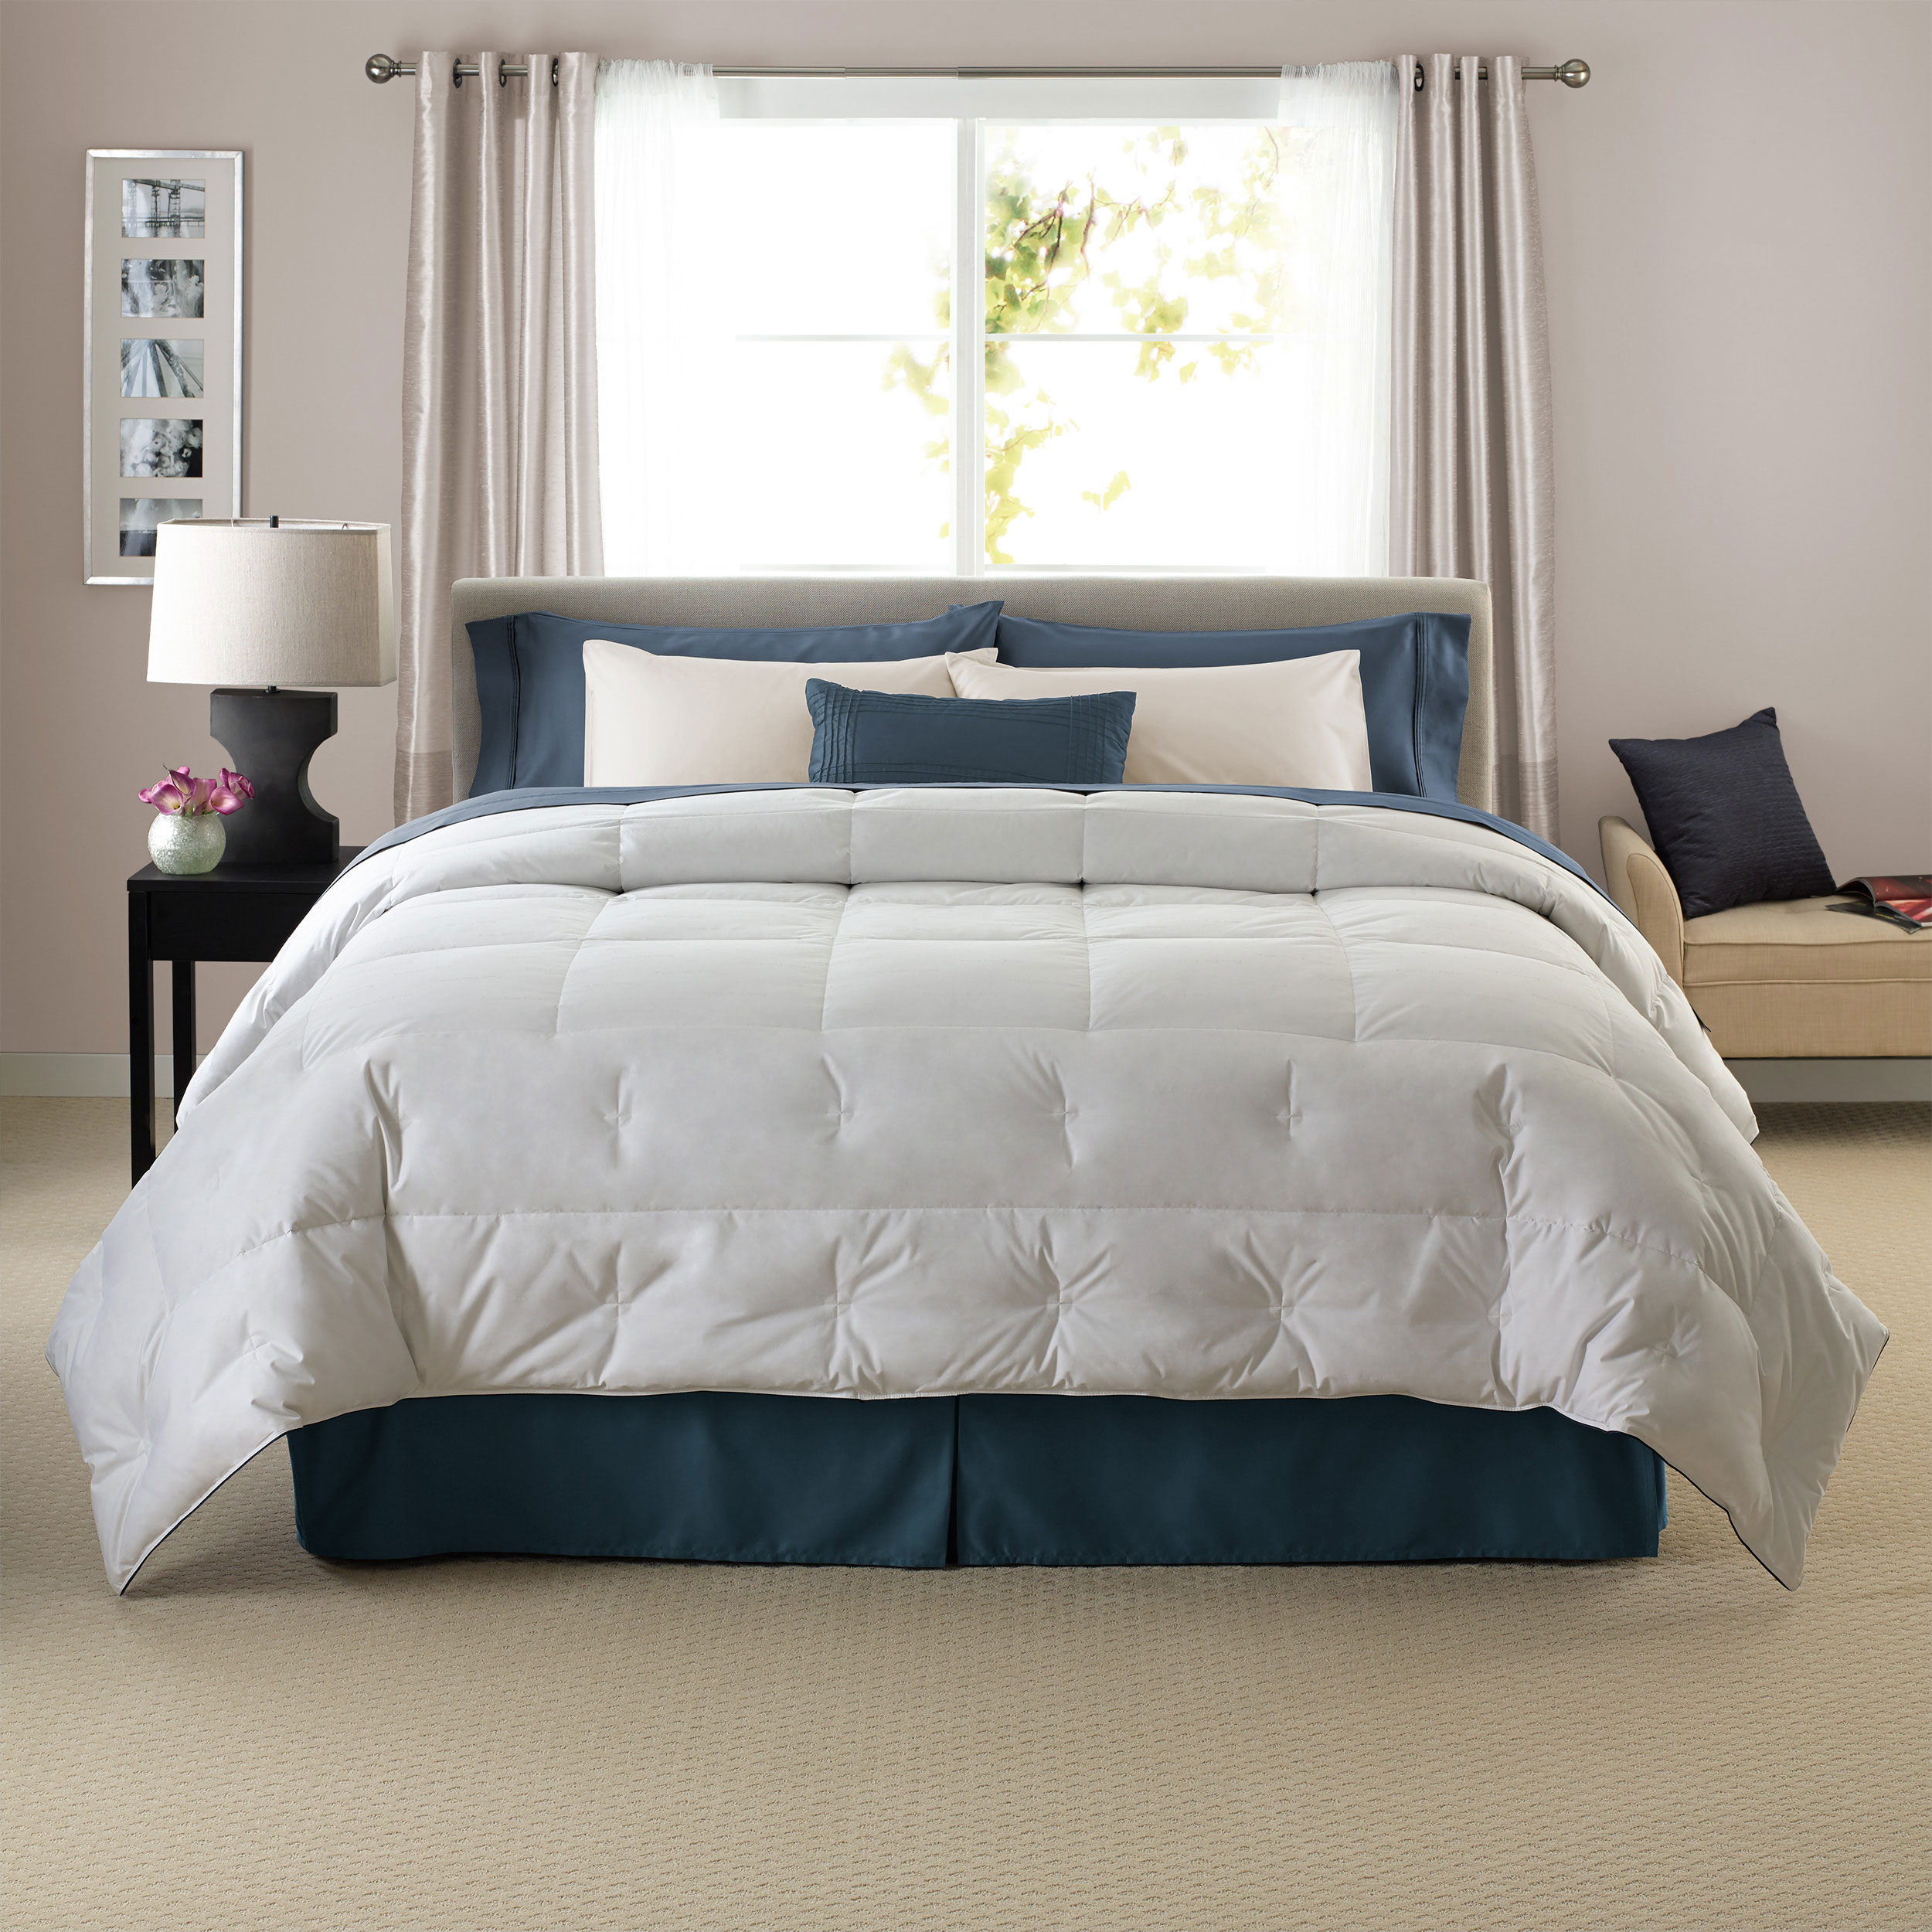 How To Choose A Comforter Pacific Coast Bedding